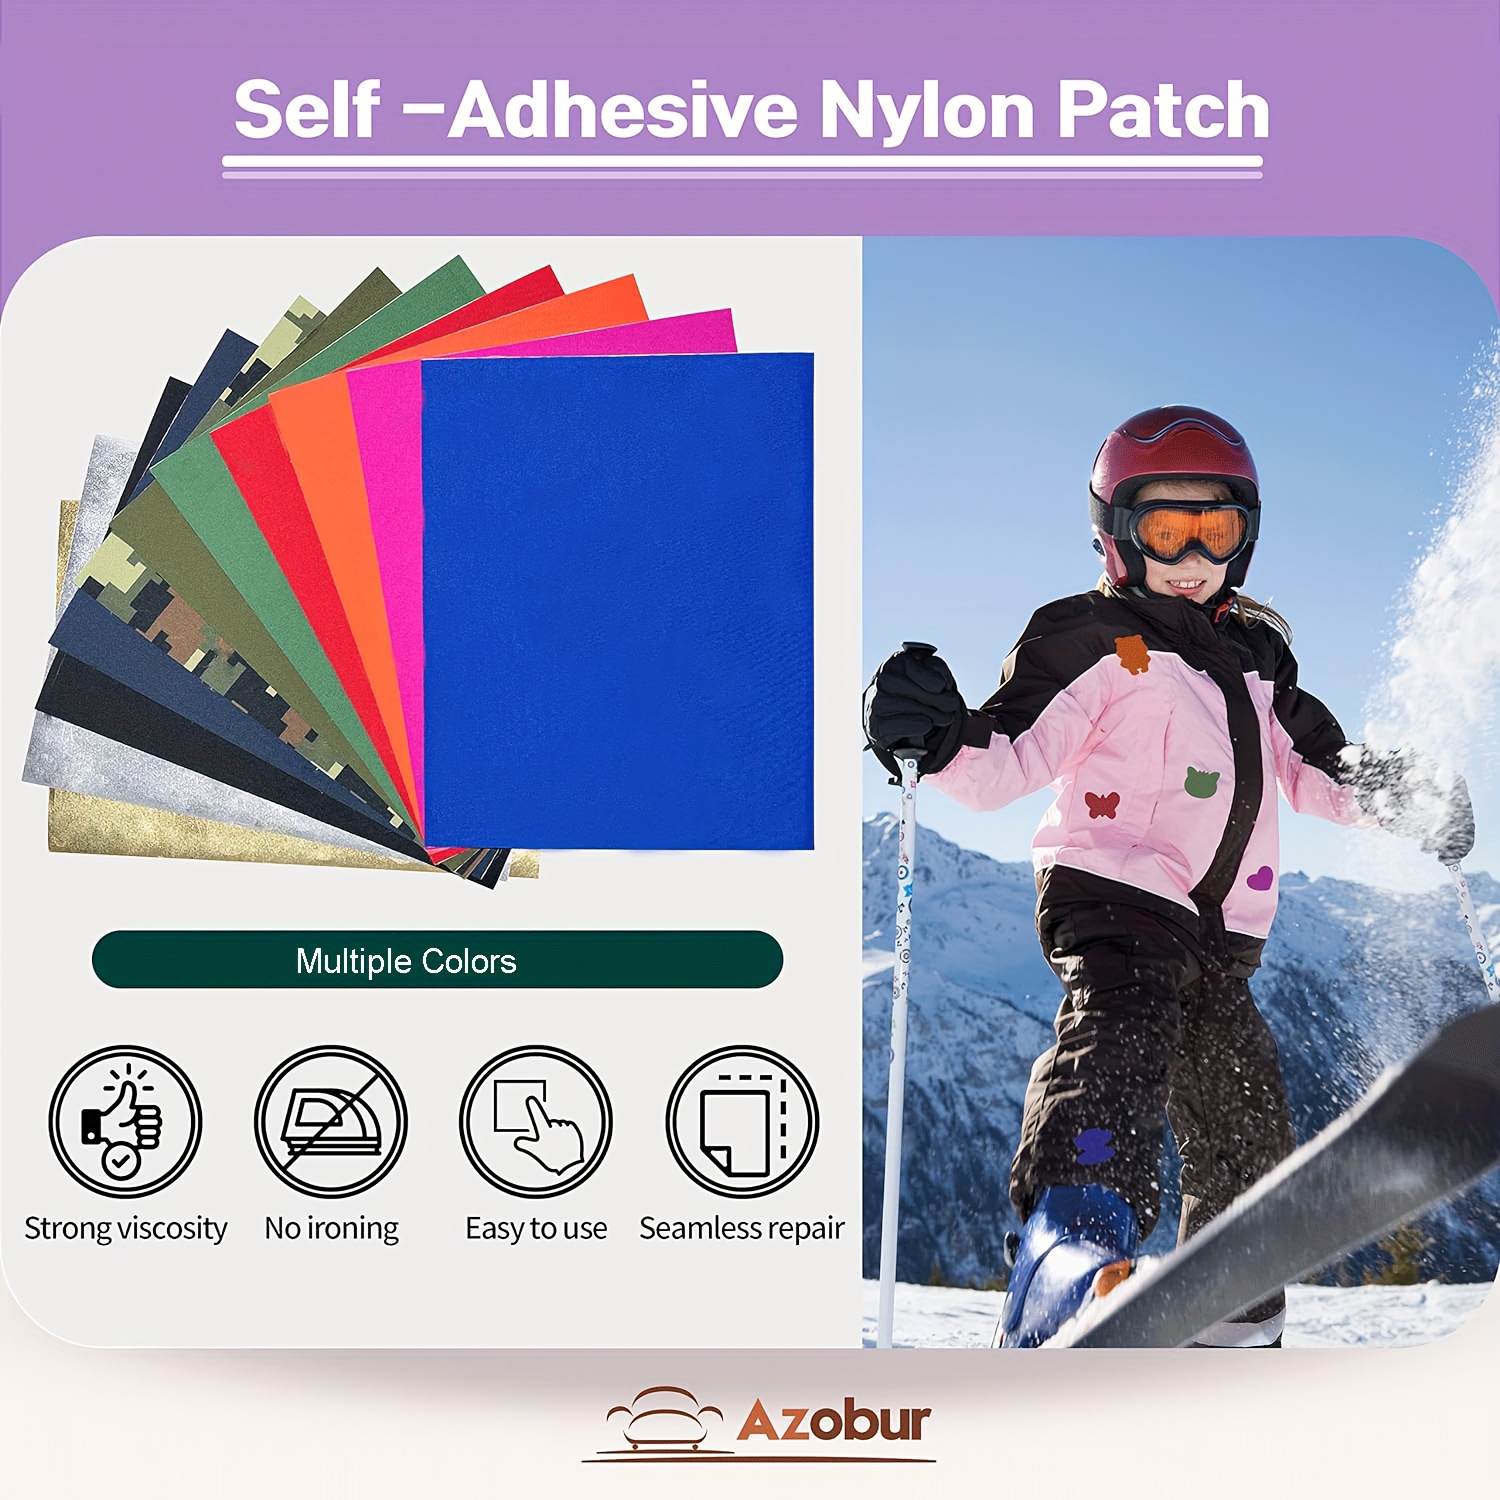 8 Pieces Nylon Repair Patches Self-Adhesive Nylon Patch Waterproof Repair  Patches for Clothing Down Jacket Tent Clothes Bag (25 x 15 cm)